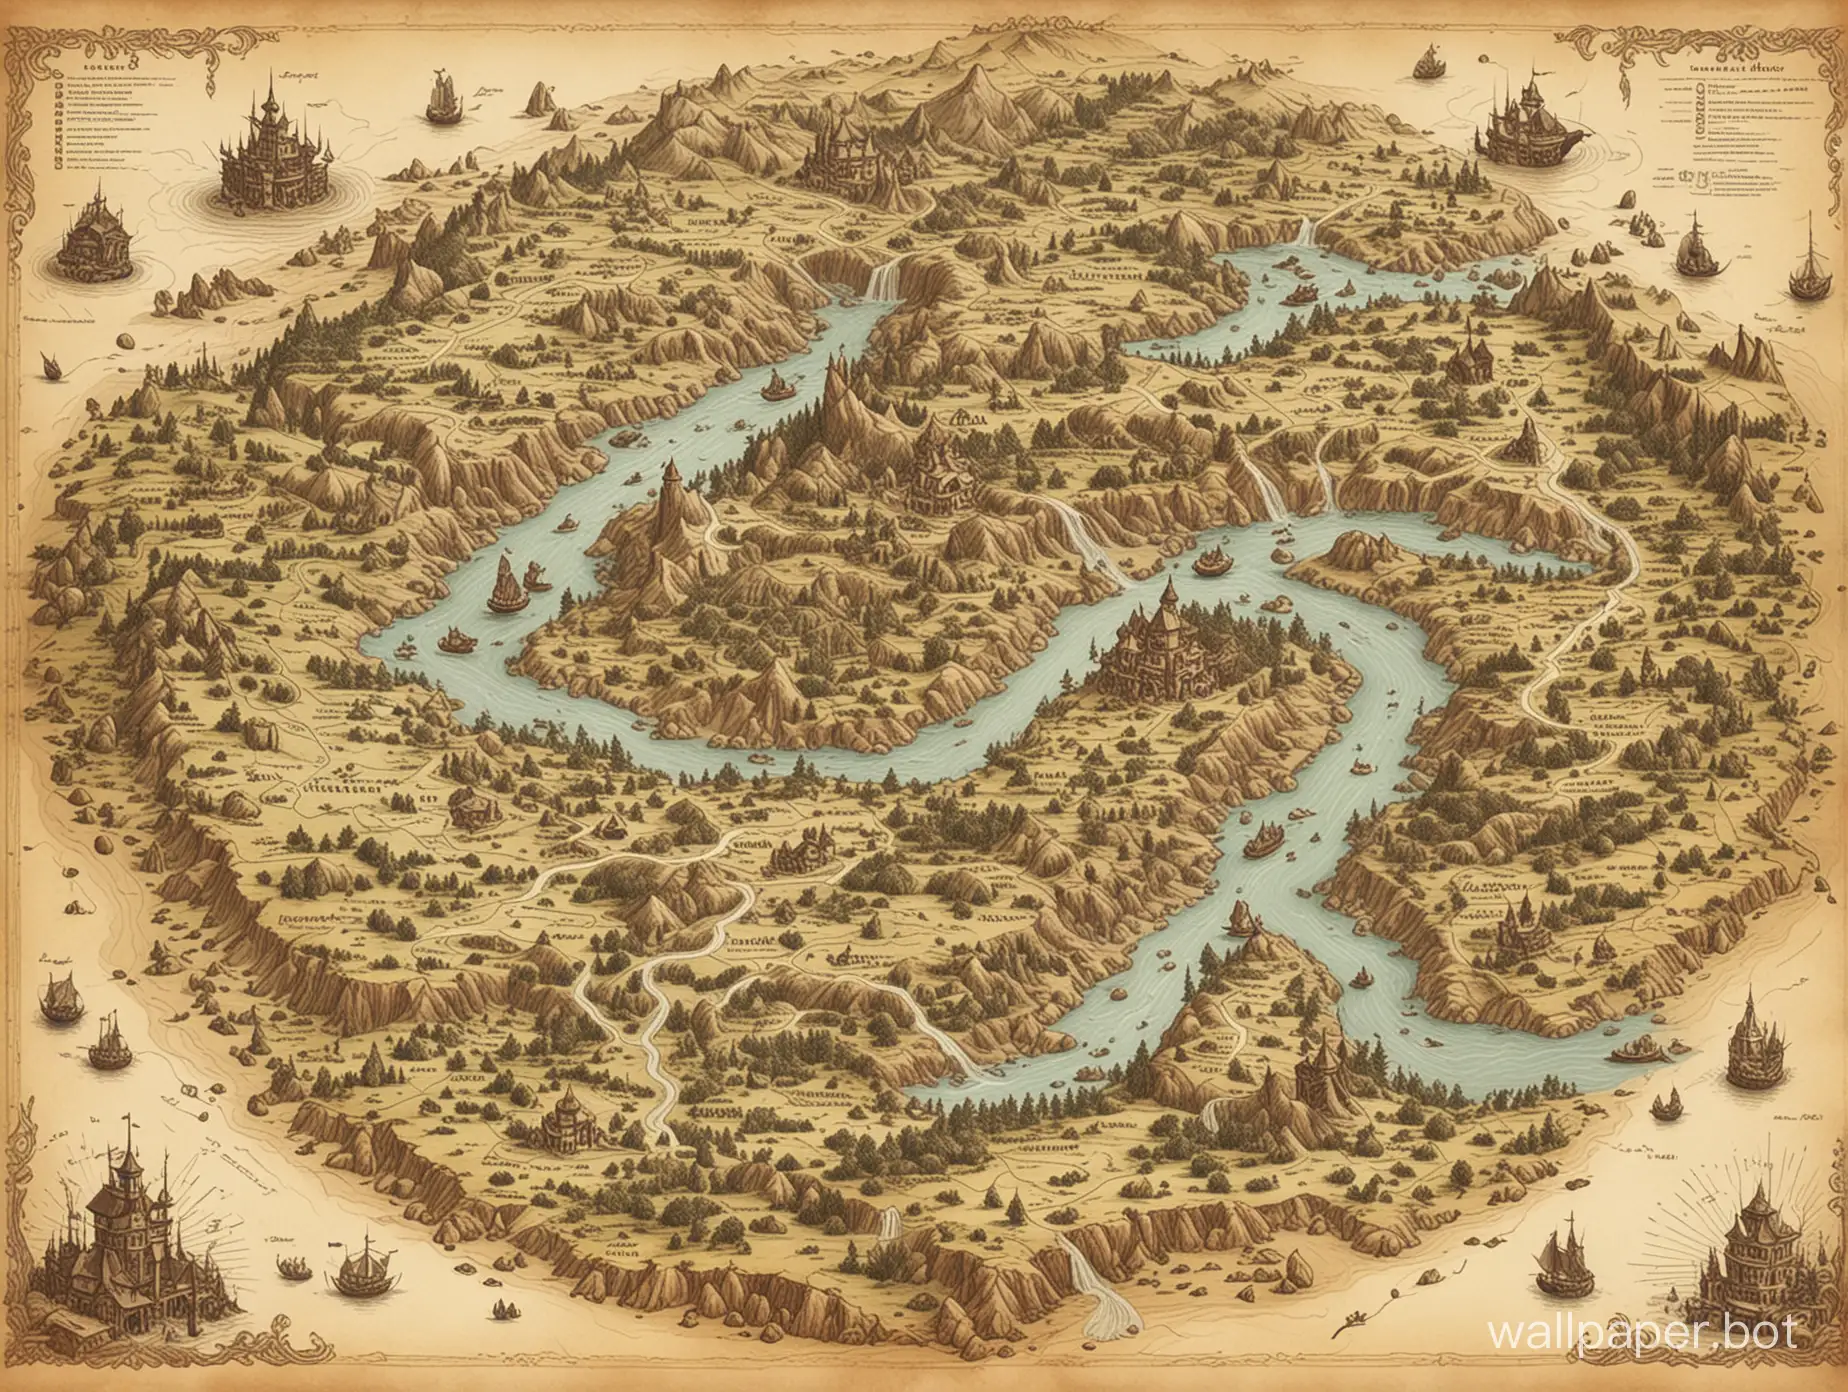 Map of a fantasy world, with different landscapes, settlements, rivers